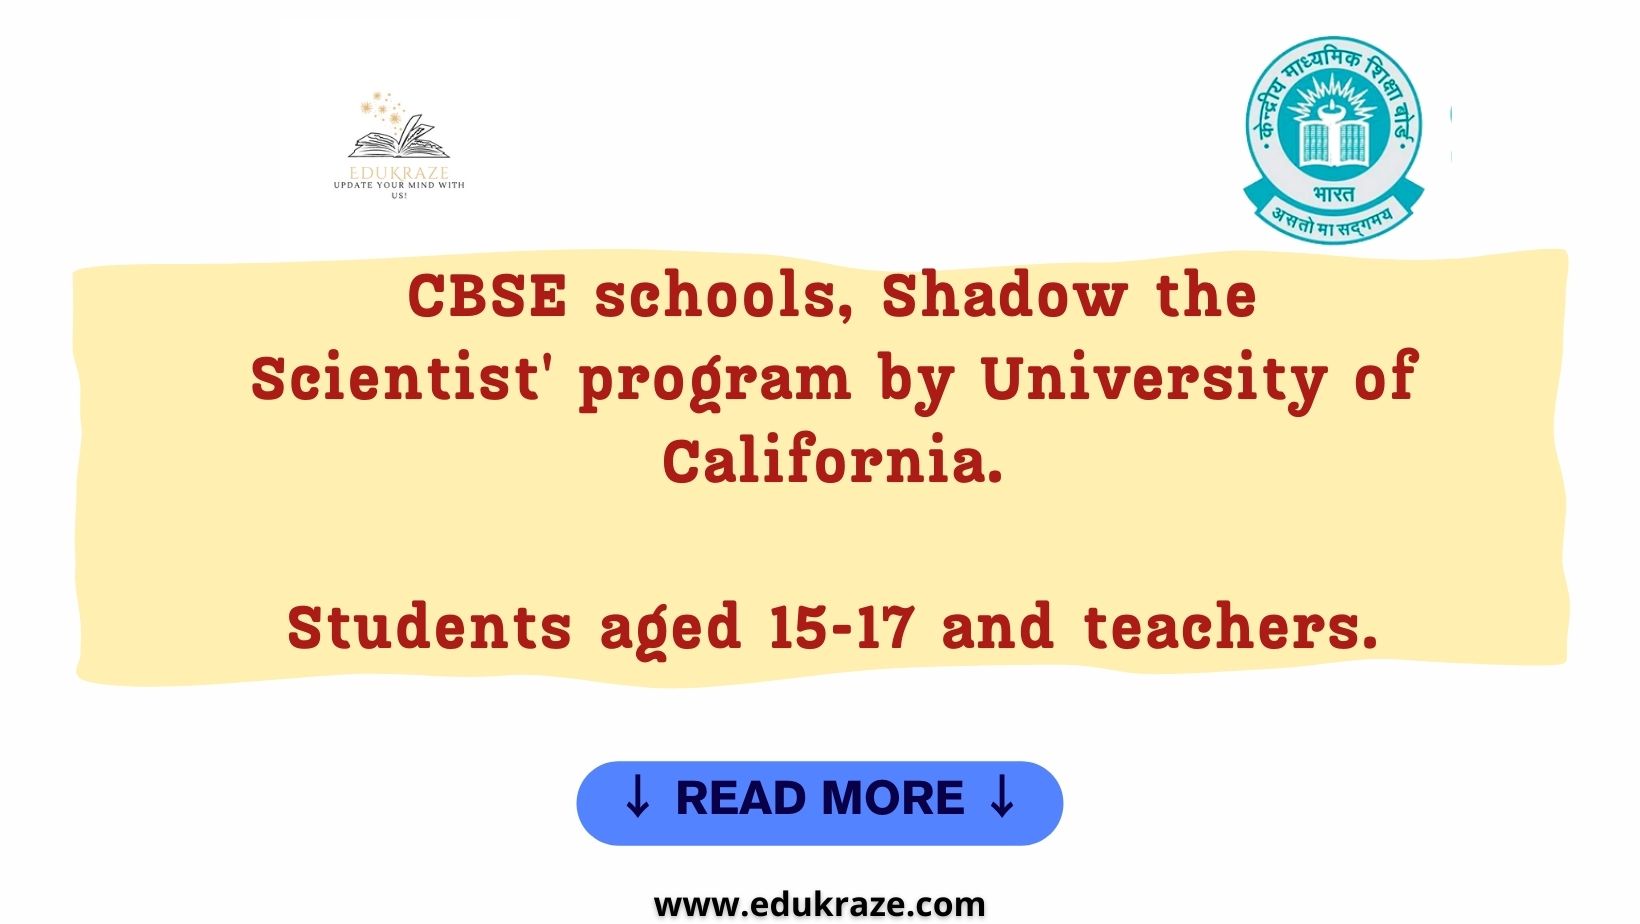 Participation Opportunity for CBSE School Students and Teachers in 'Shadow the Scientist' Program